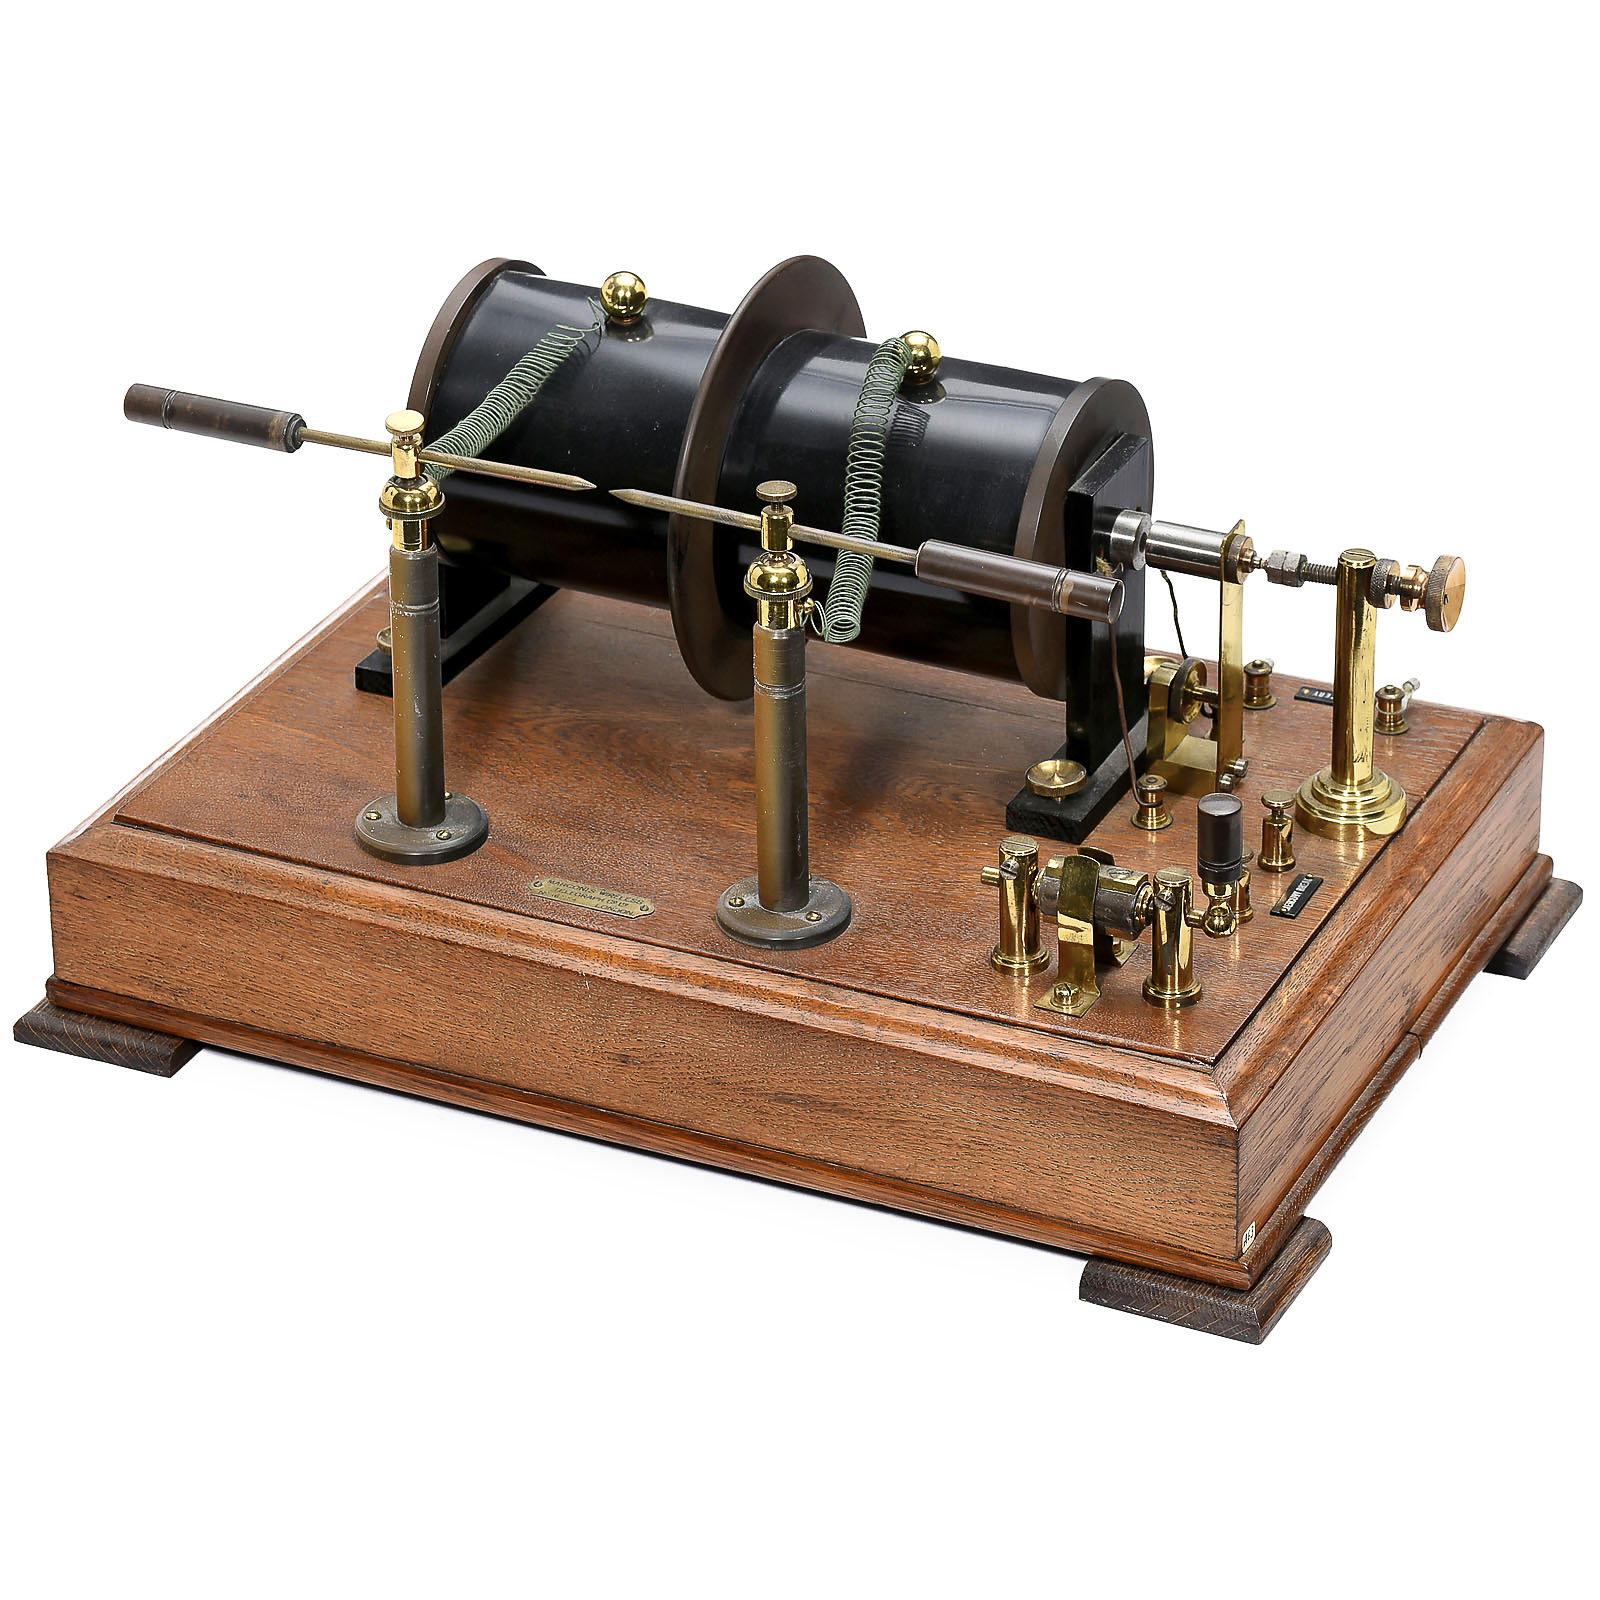 Replica of Marconi's Titanic Spark Coil Transmitter  Magnificent working replica, oak base with - Image 2 of 3